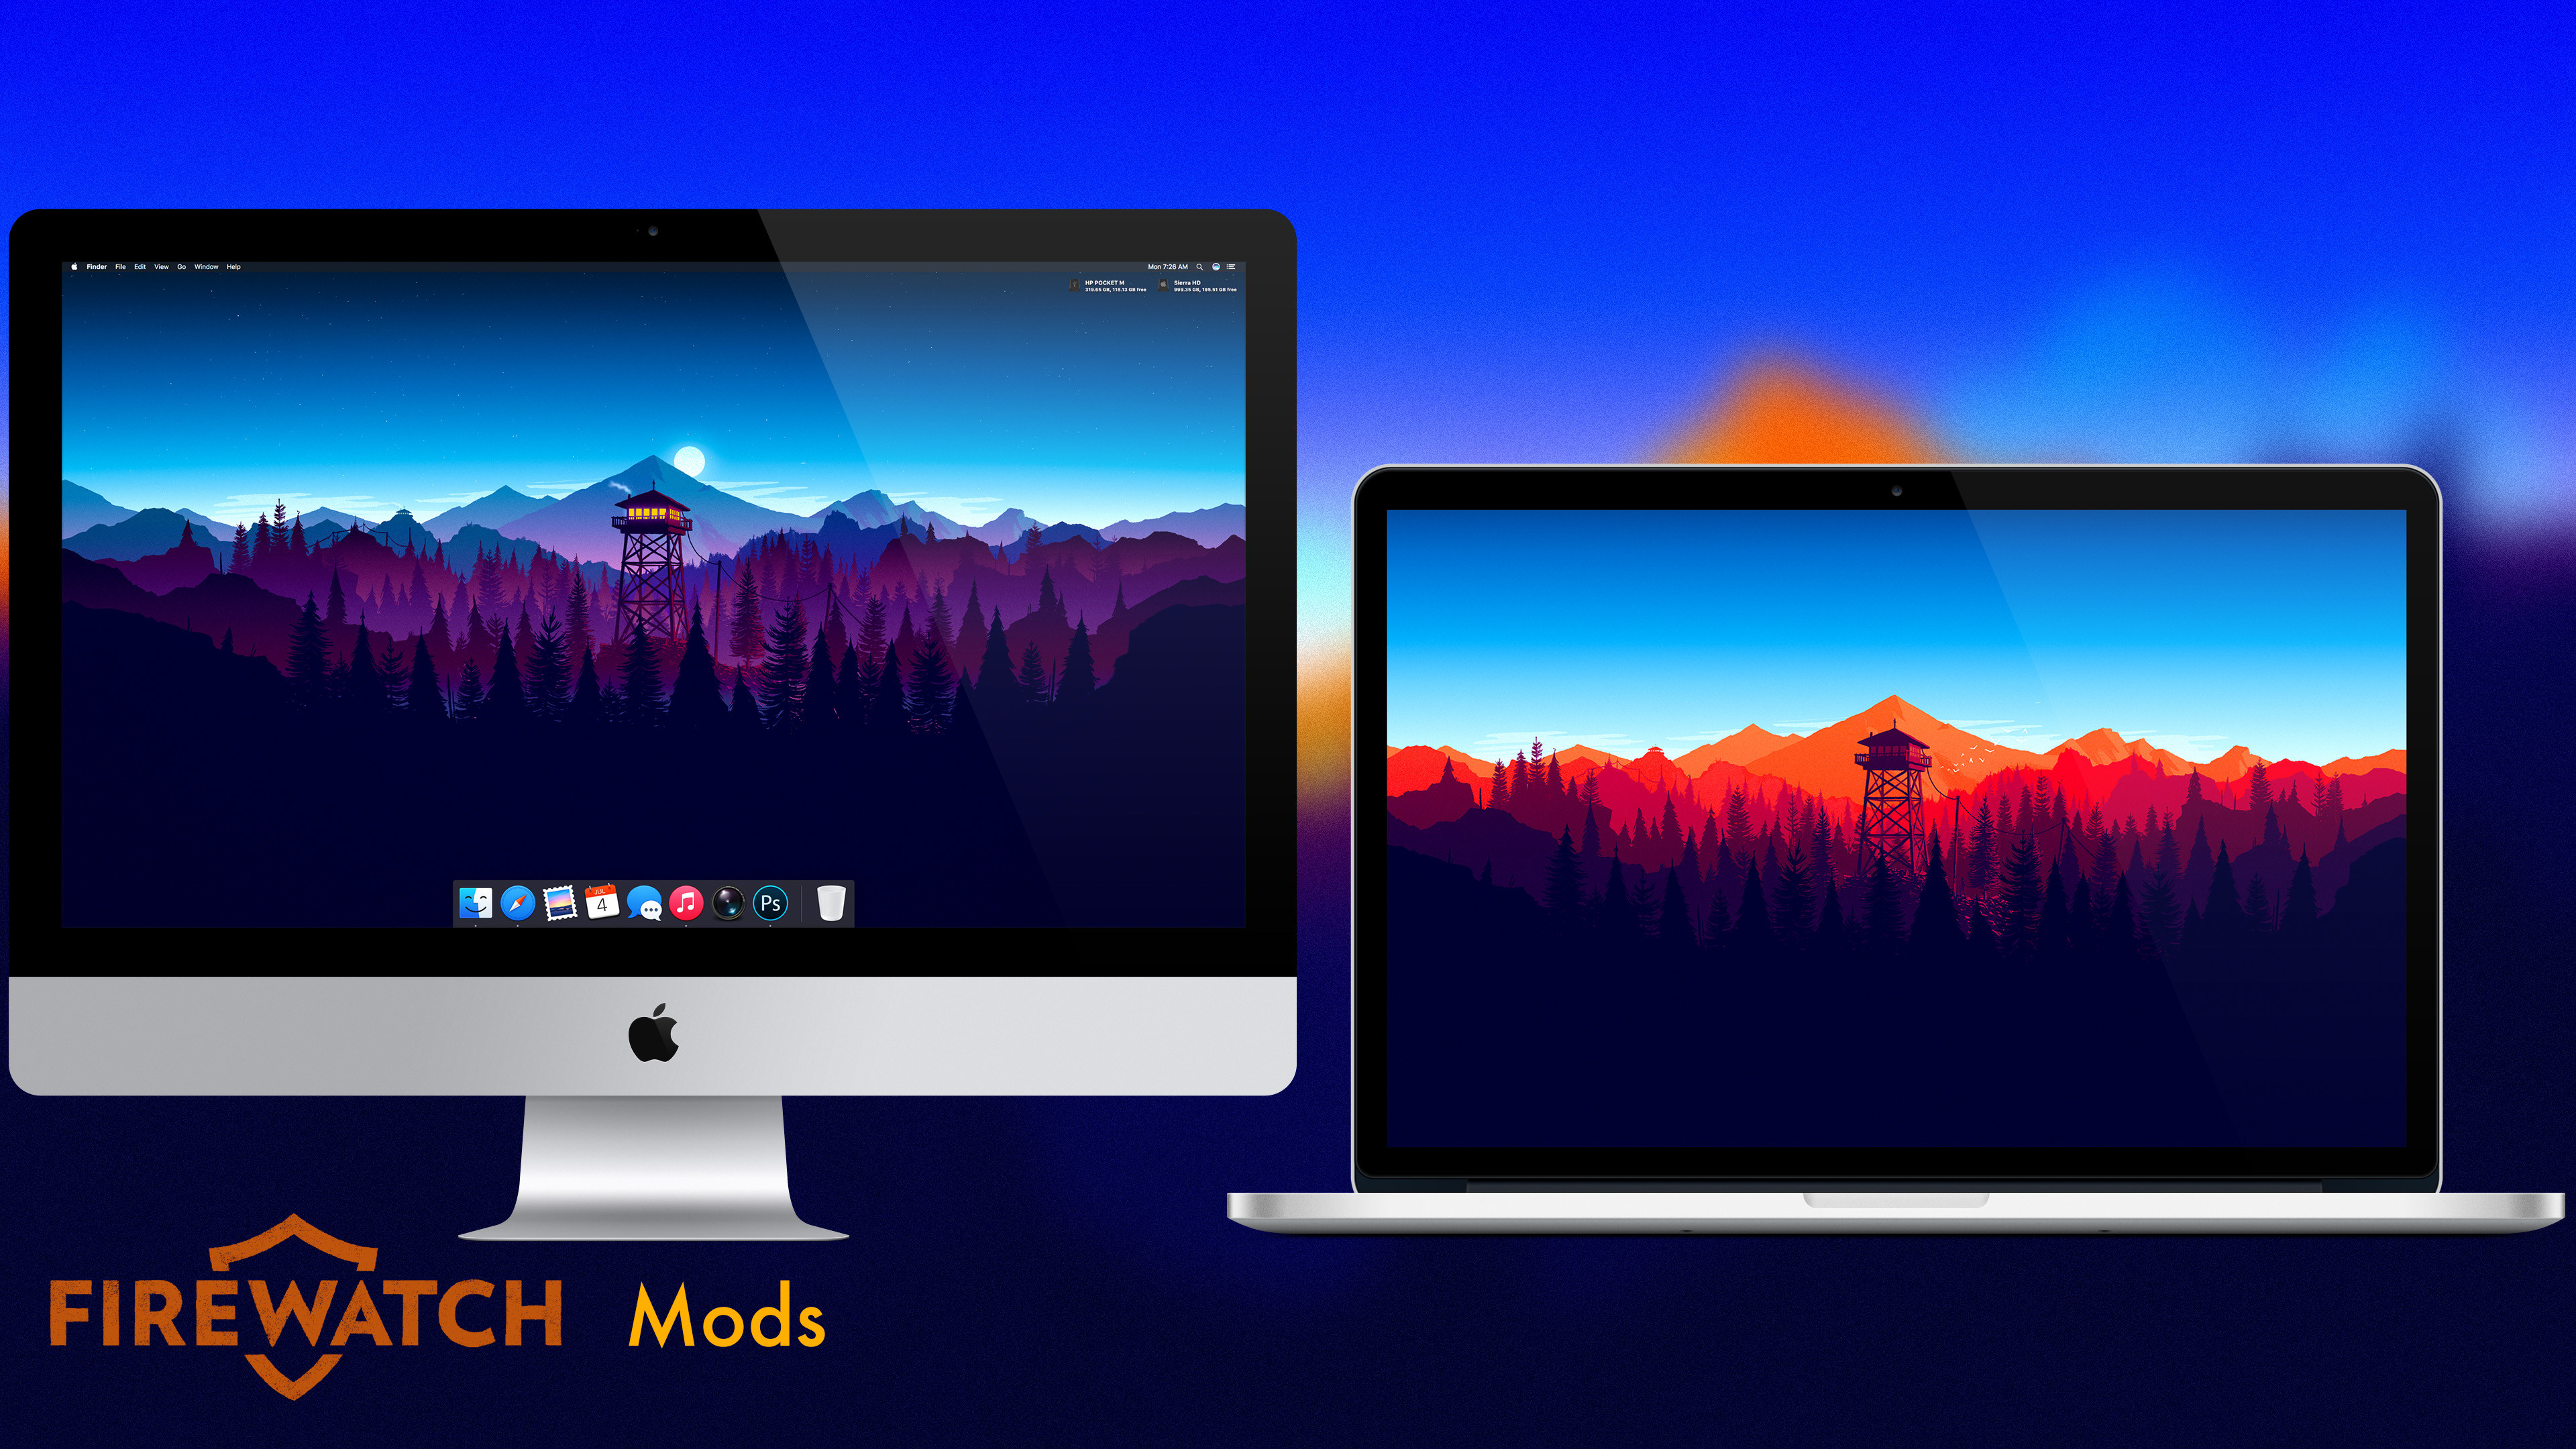 3840x2160 Firewatch Mods by AaronOlive Firewatch Mods by AaronOlive